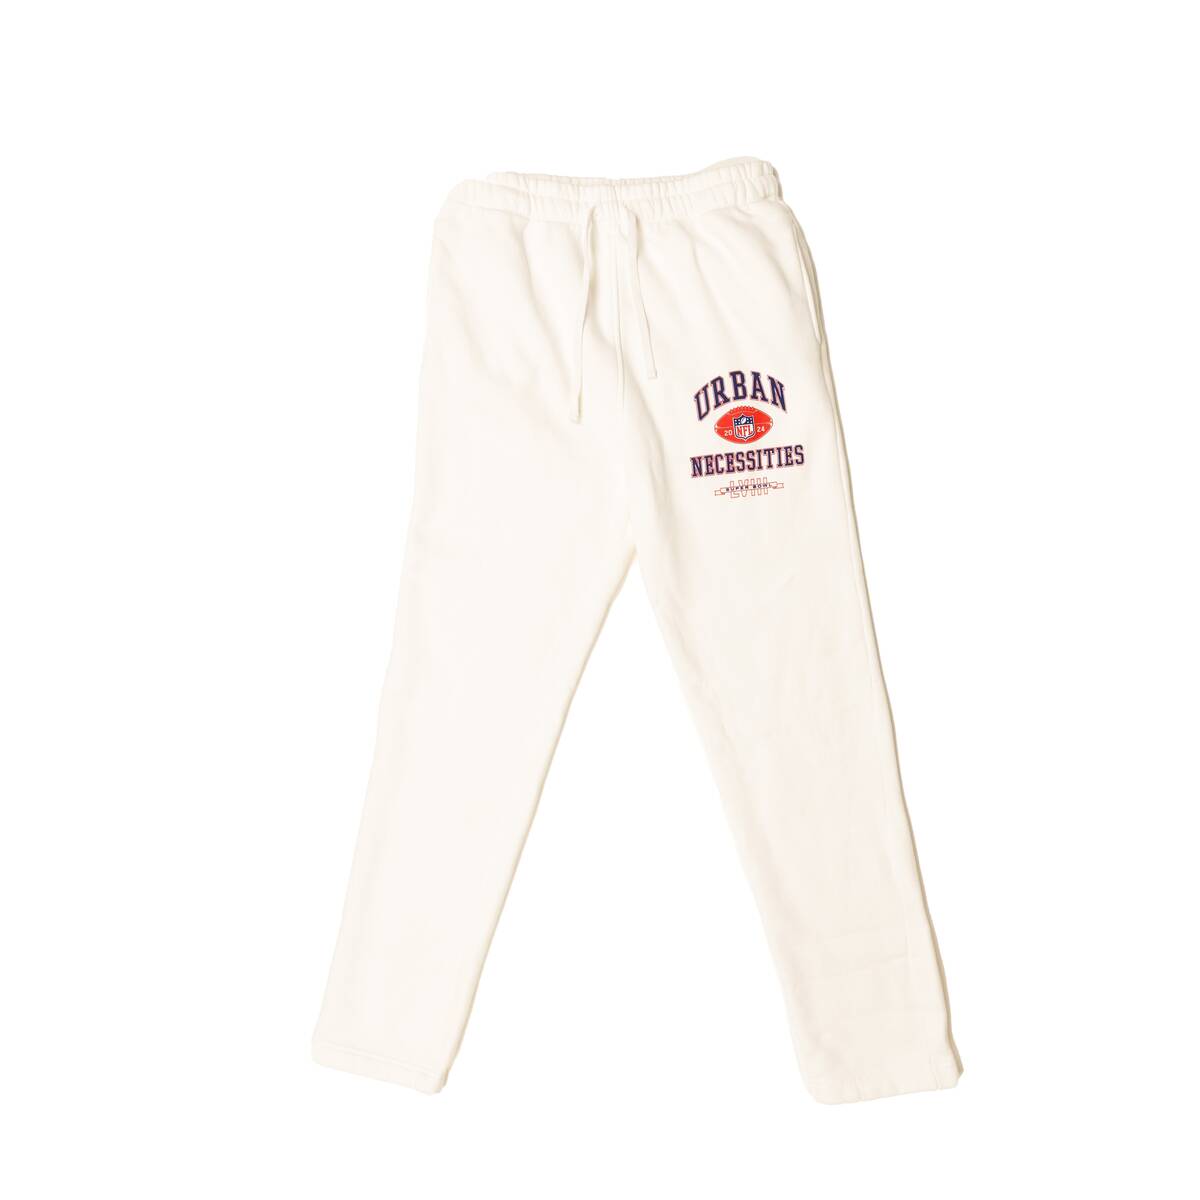 Sweatpants designed by the Las Vegas based Urban Necessities for the Origins: an NFL collection ...